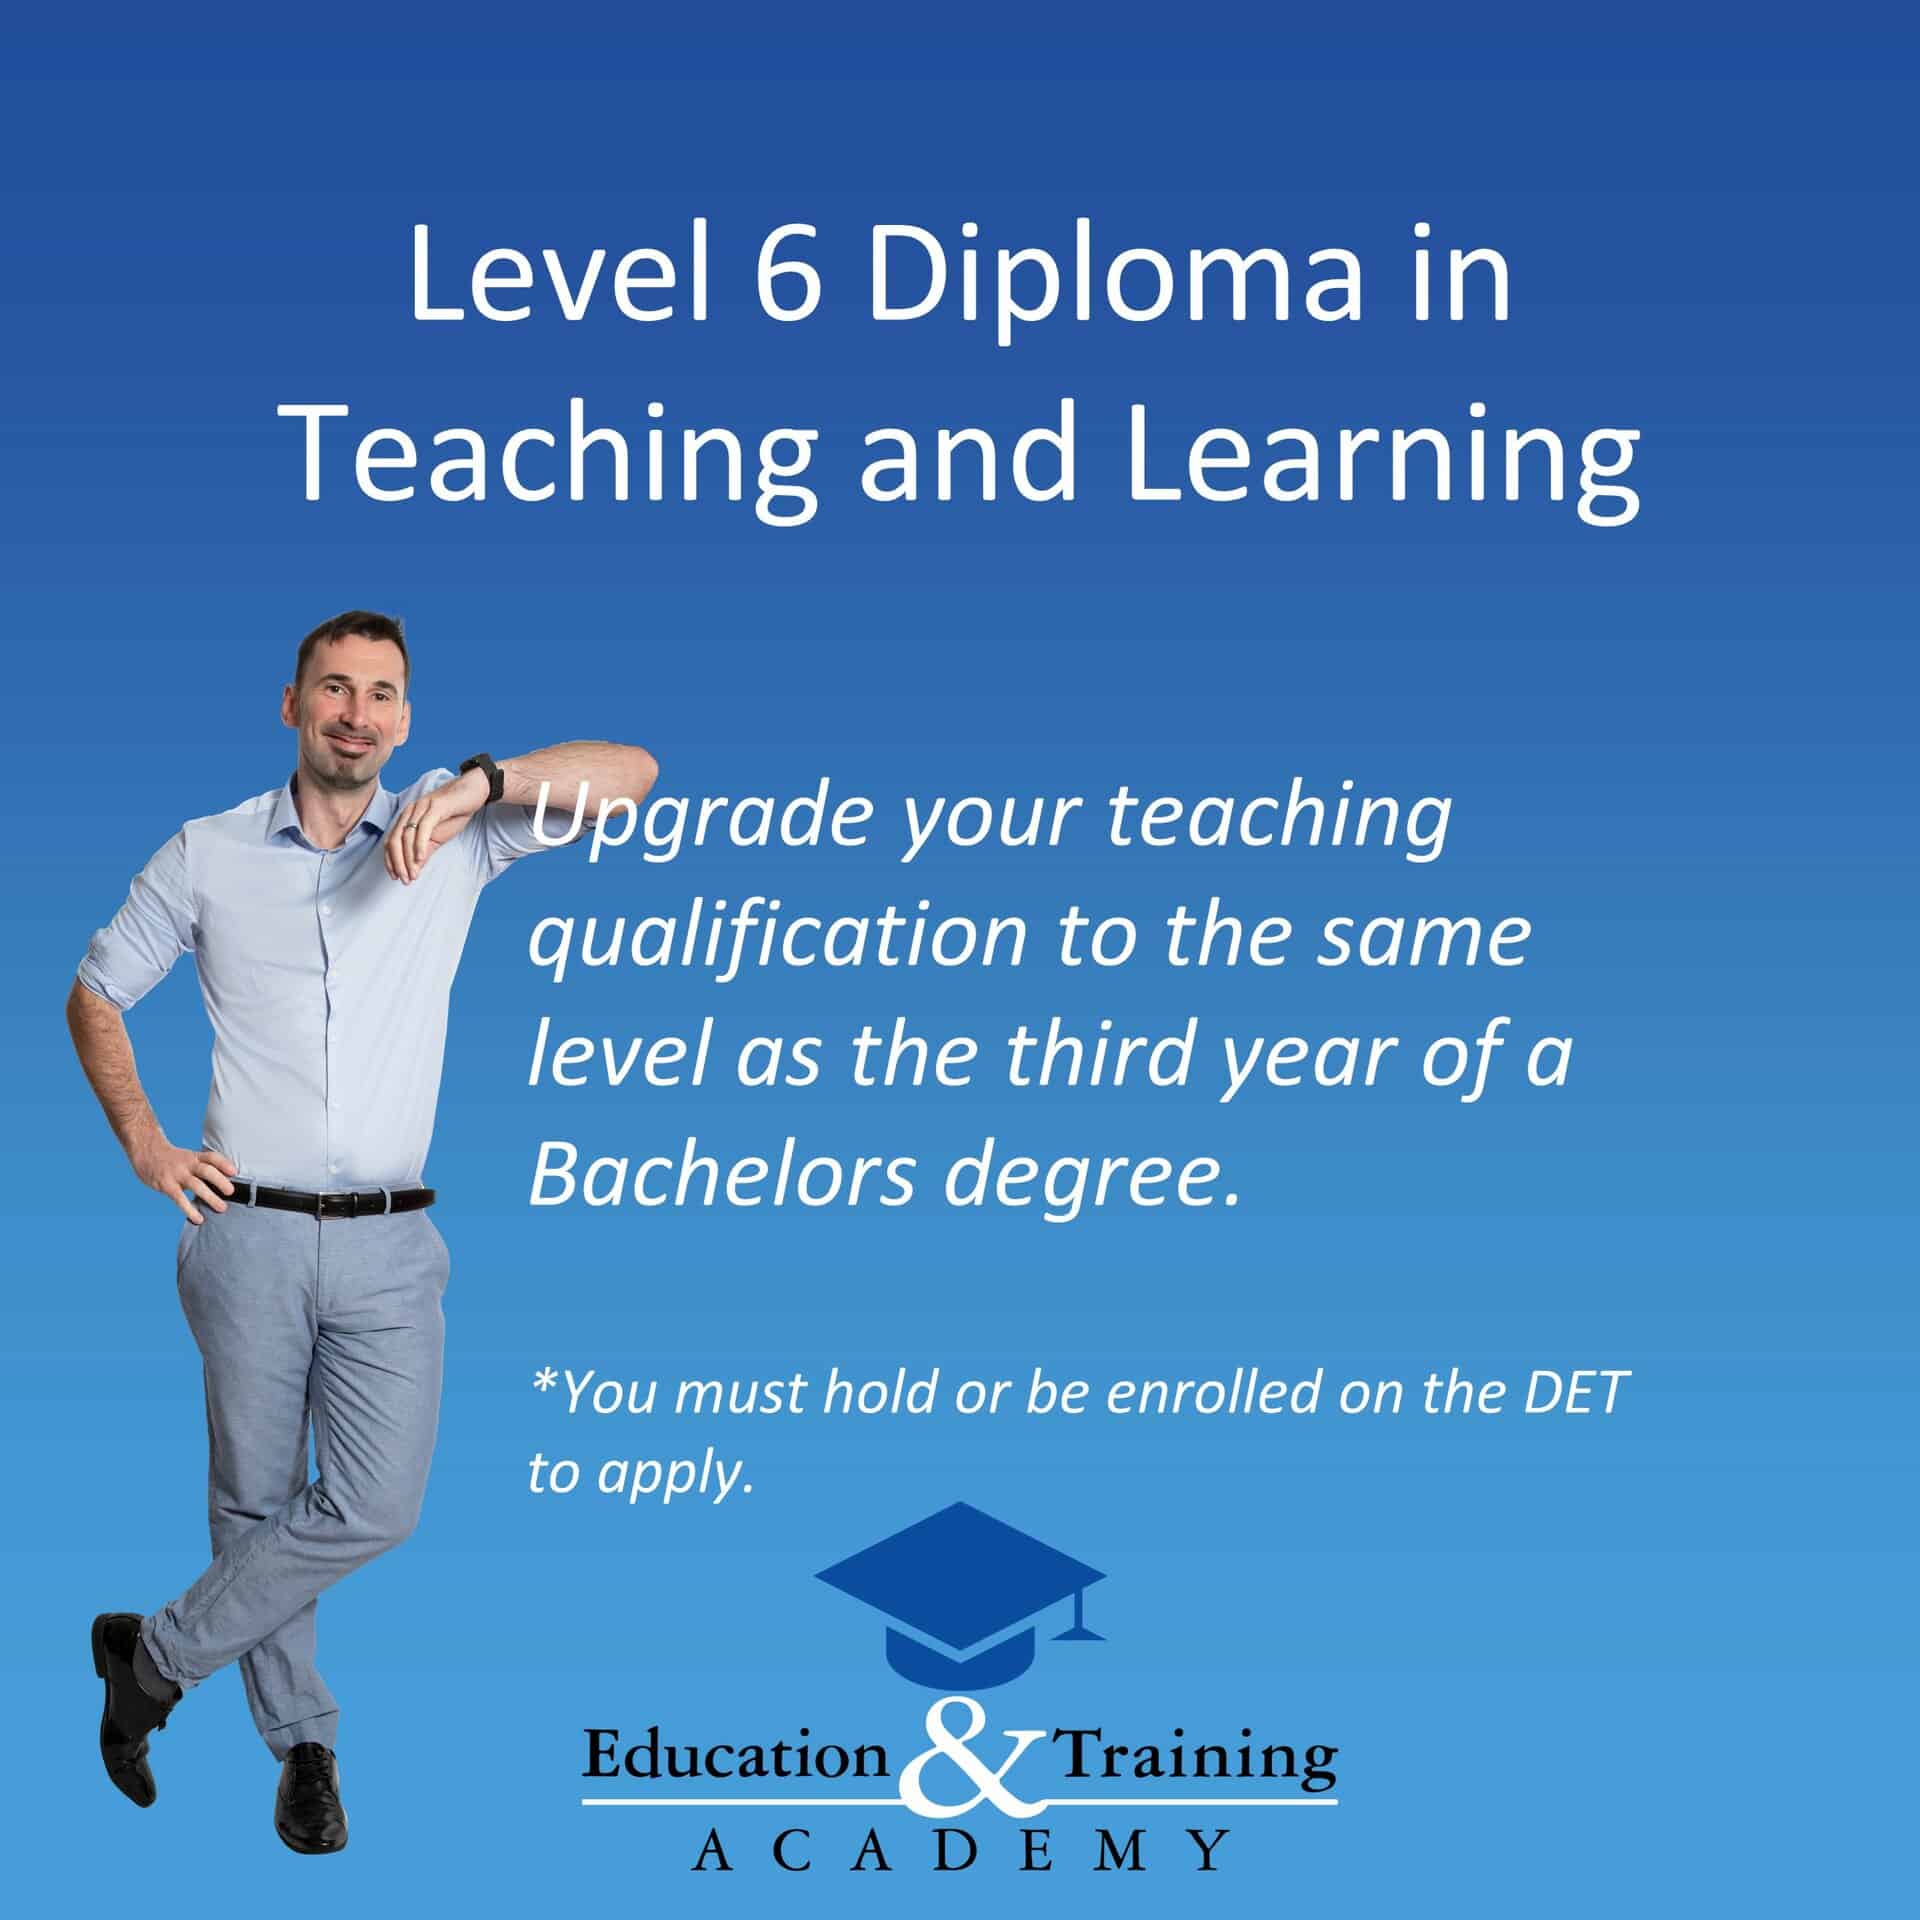 Level 6 Diploma in Teaching and Learning